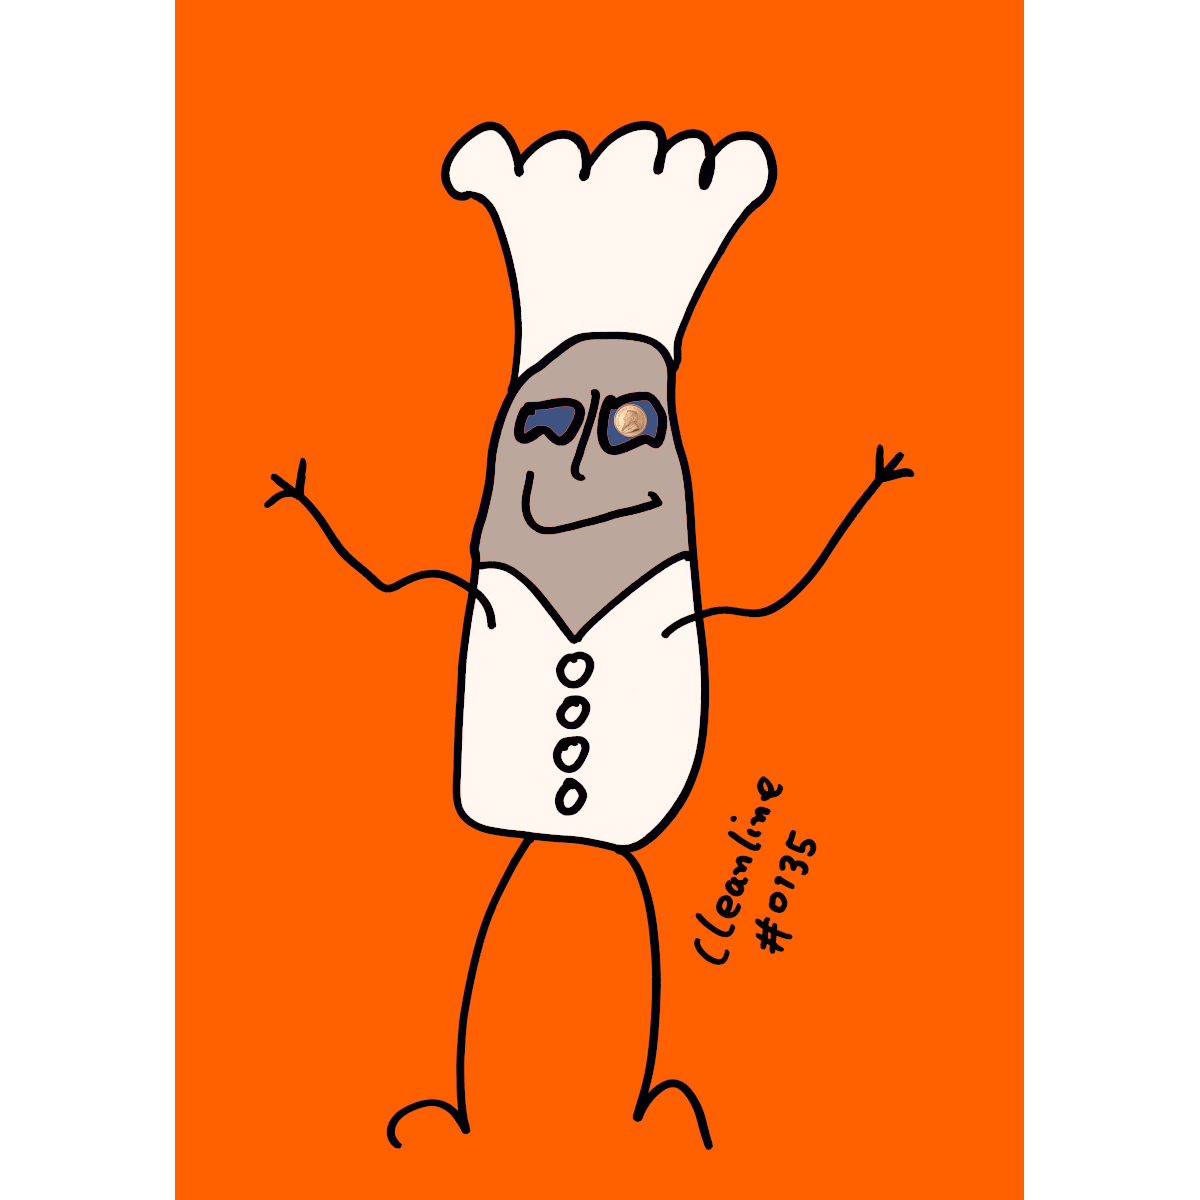 #0135 - lucky chef - print: 841 mm x 1189 mm